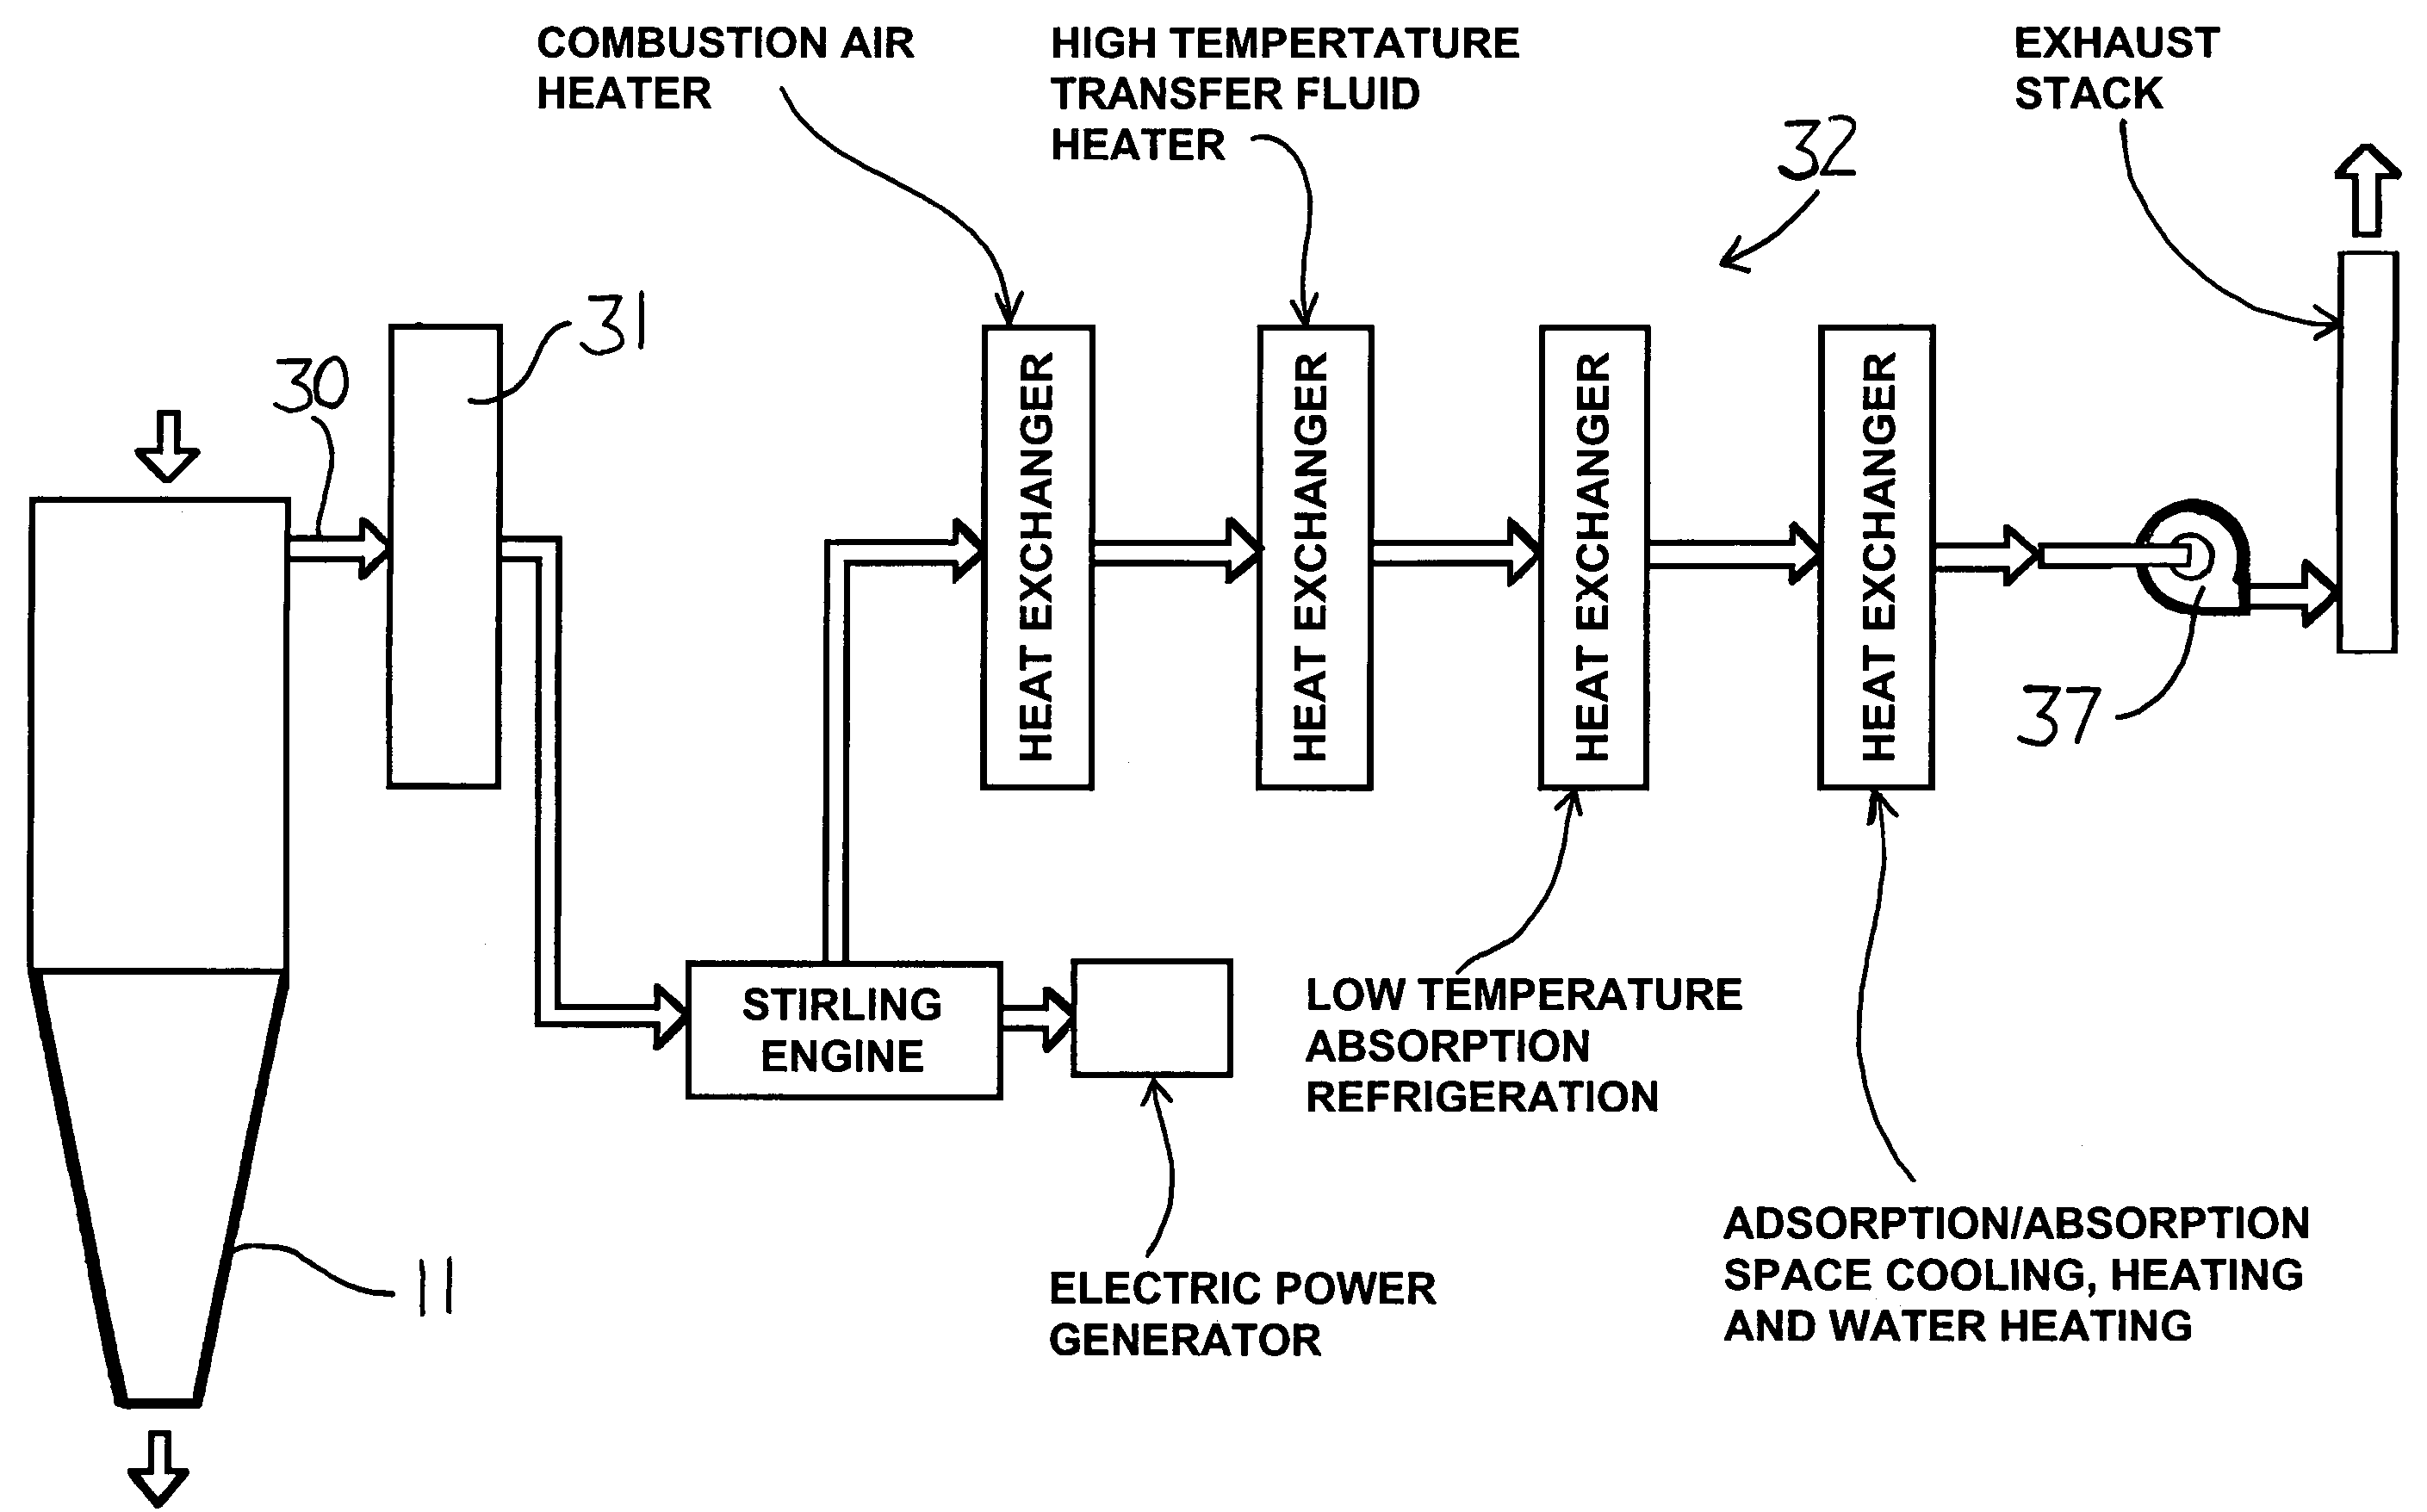 Biomass conversion by combustion